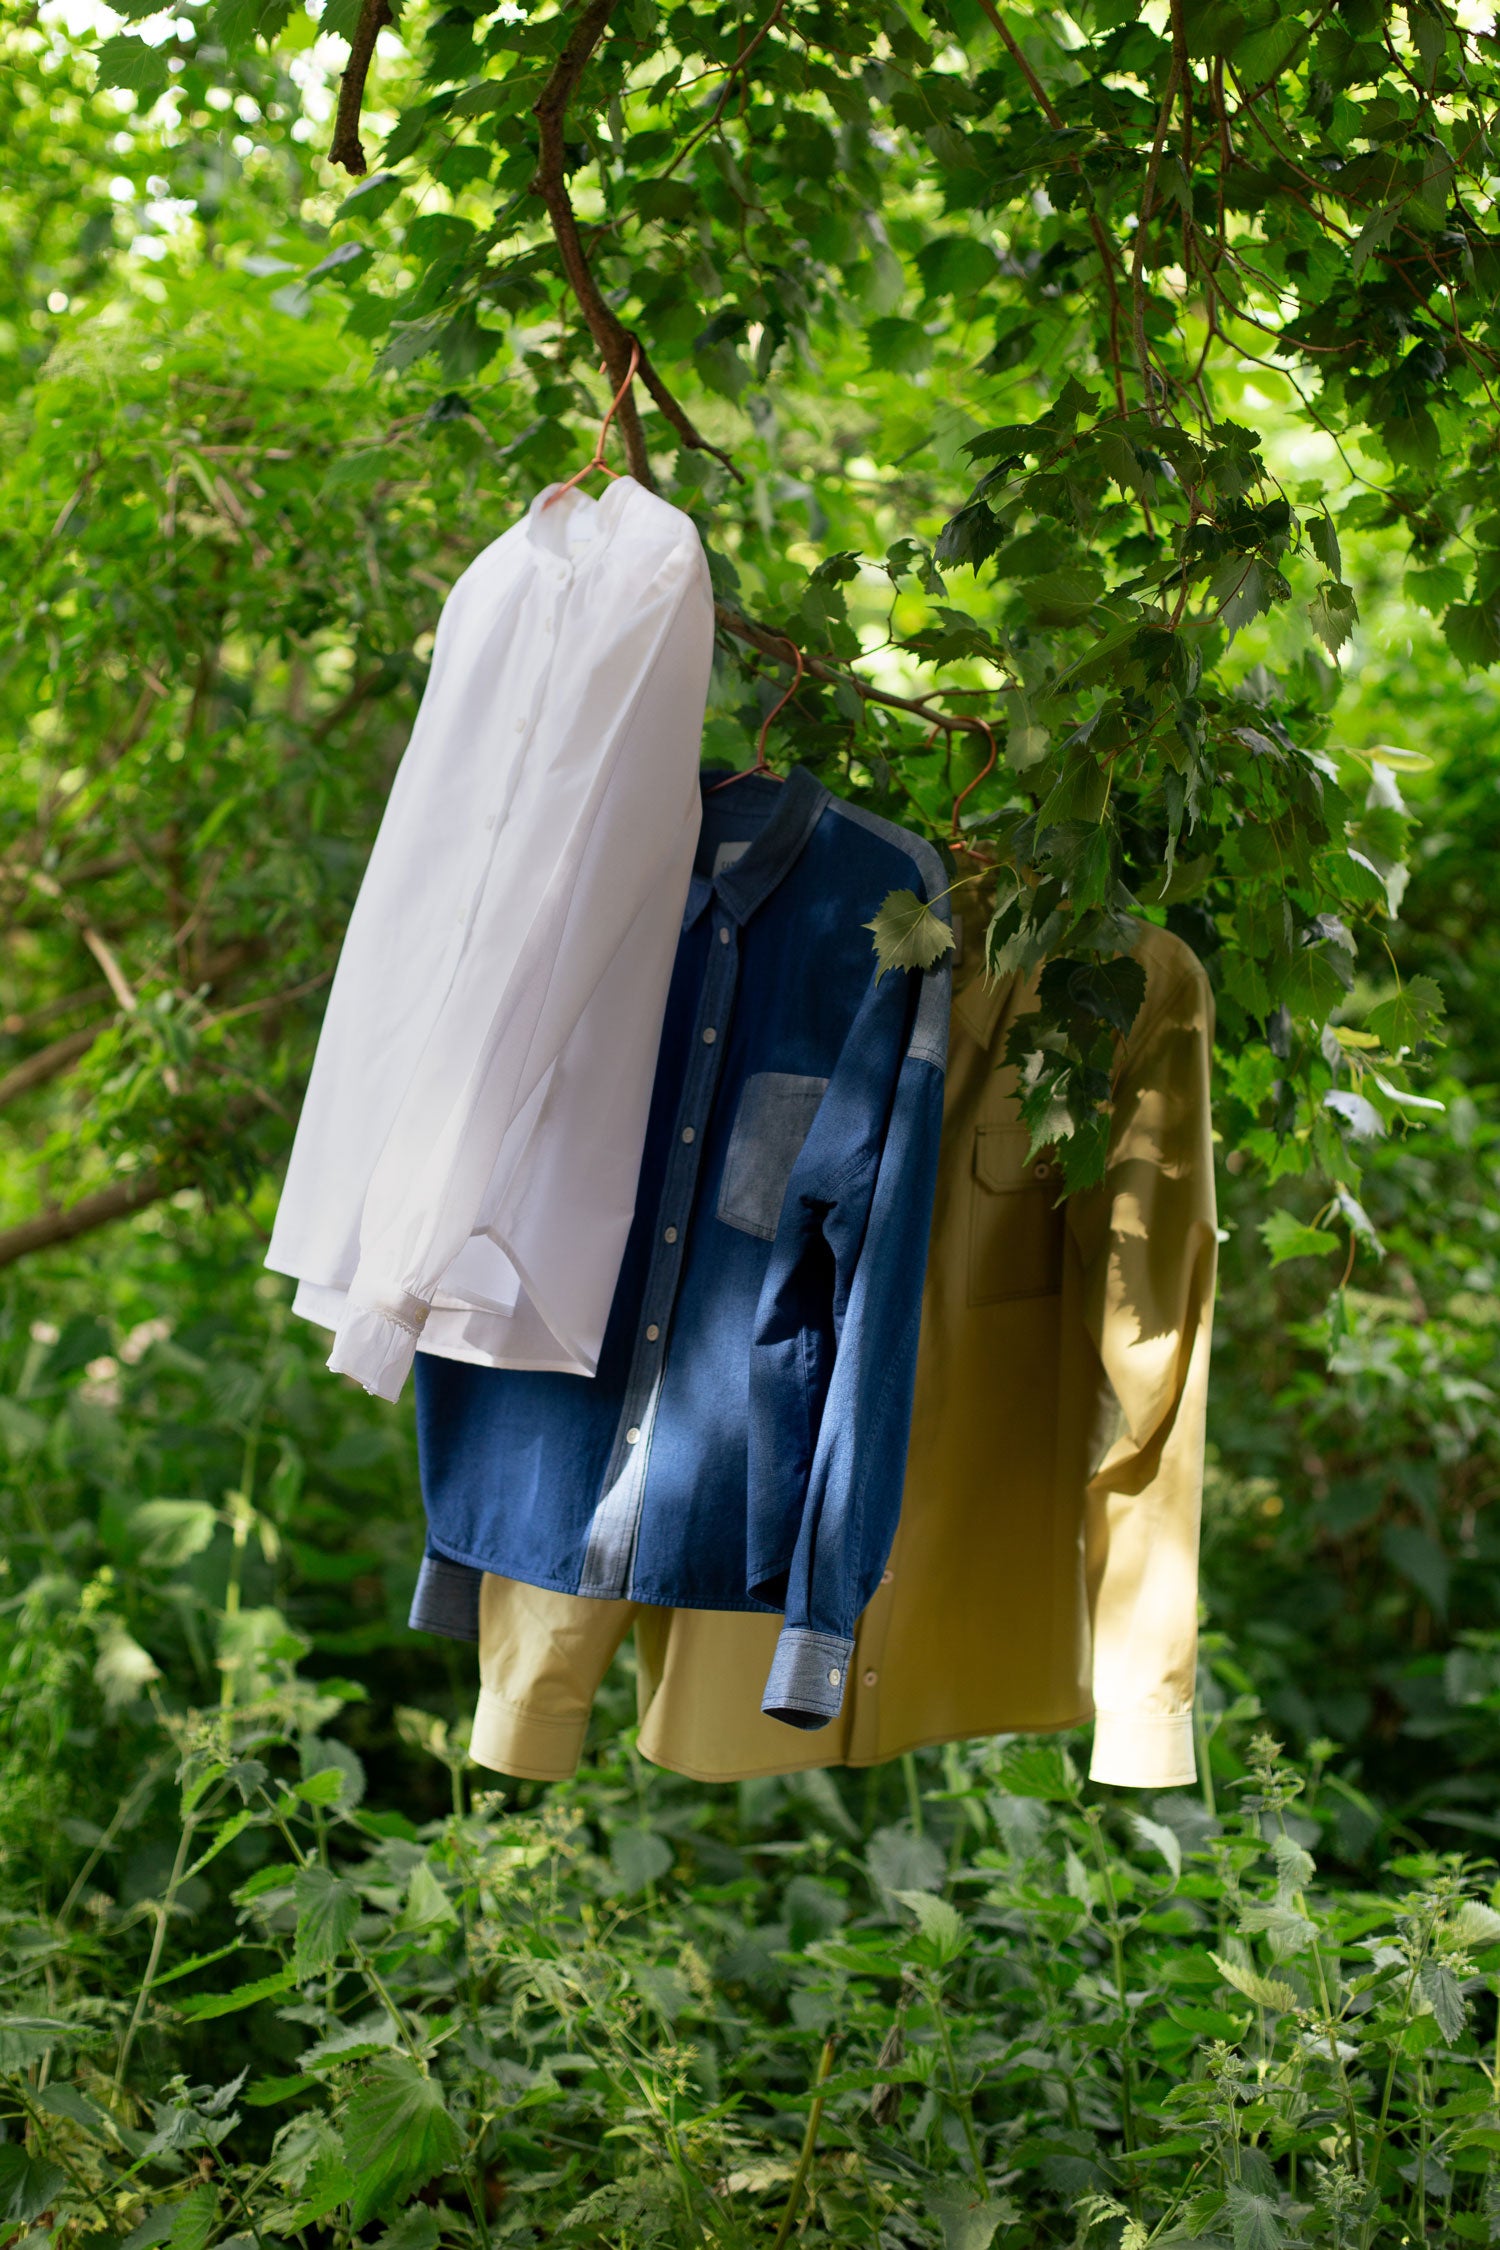 Image shows Saywood shirts in white, denim and olive, hanging from a tree branch, blowing in the breeze. Trees and greenery surround the clothes.